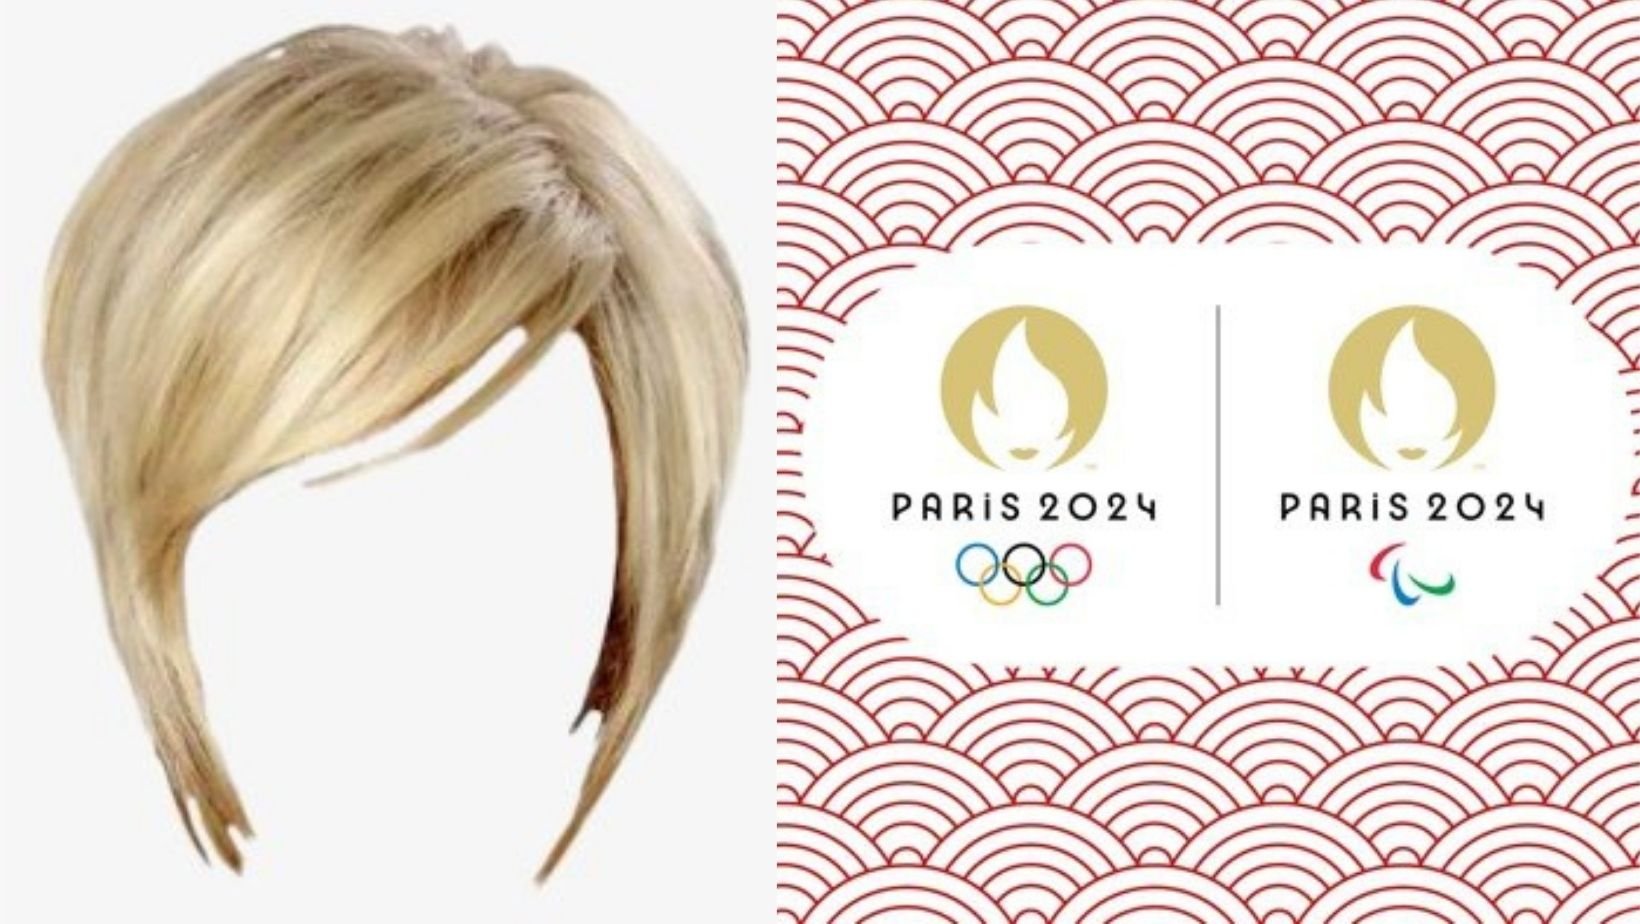 cover.jpg?resize=412,232 - Paris' 2024 Olympics Logo Has Been Heavily Criticized For Looking Like A "Karen"